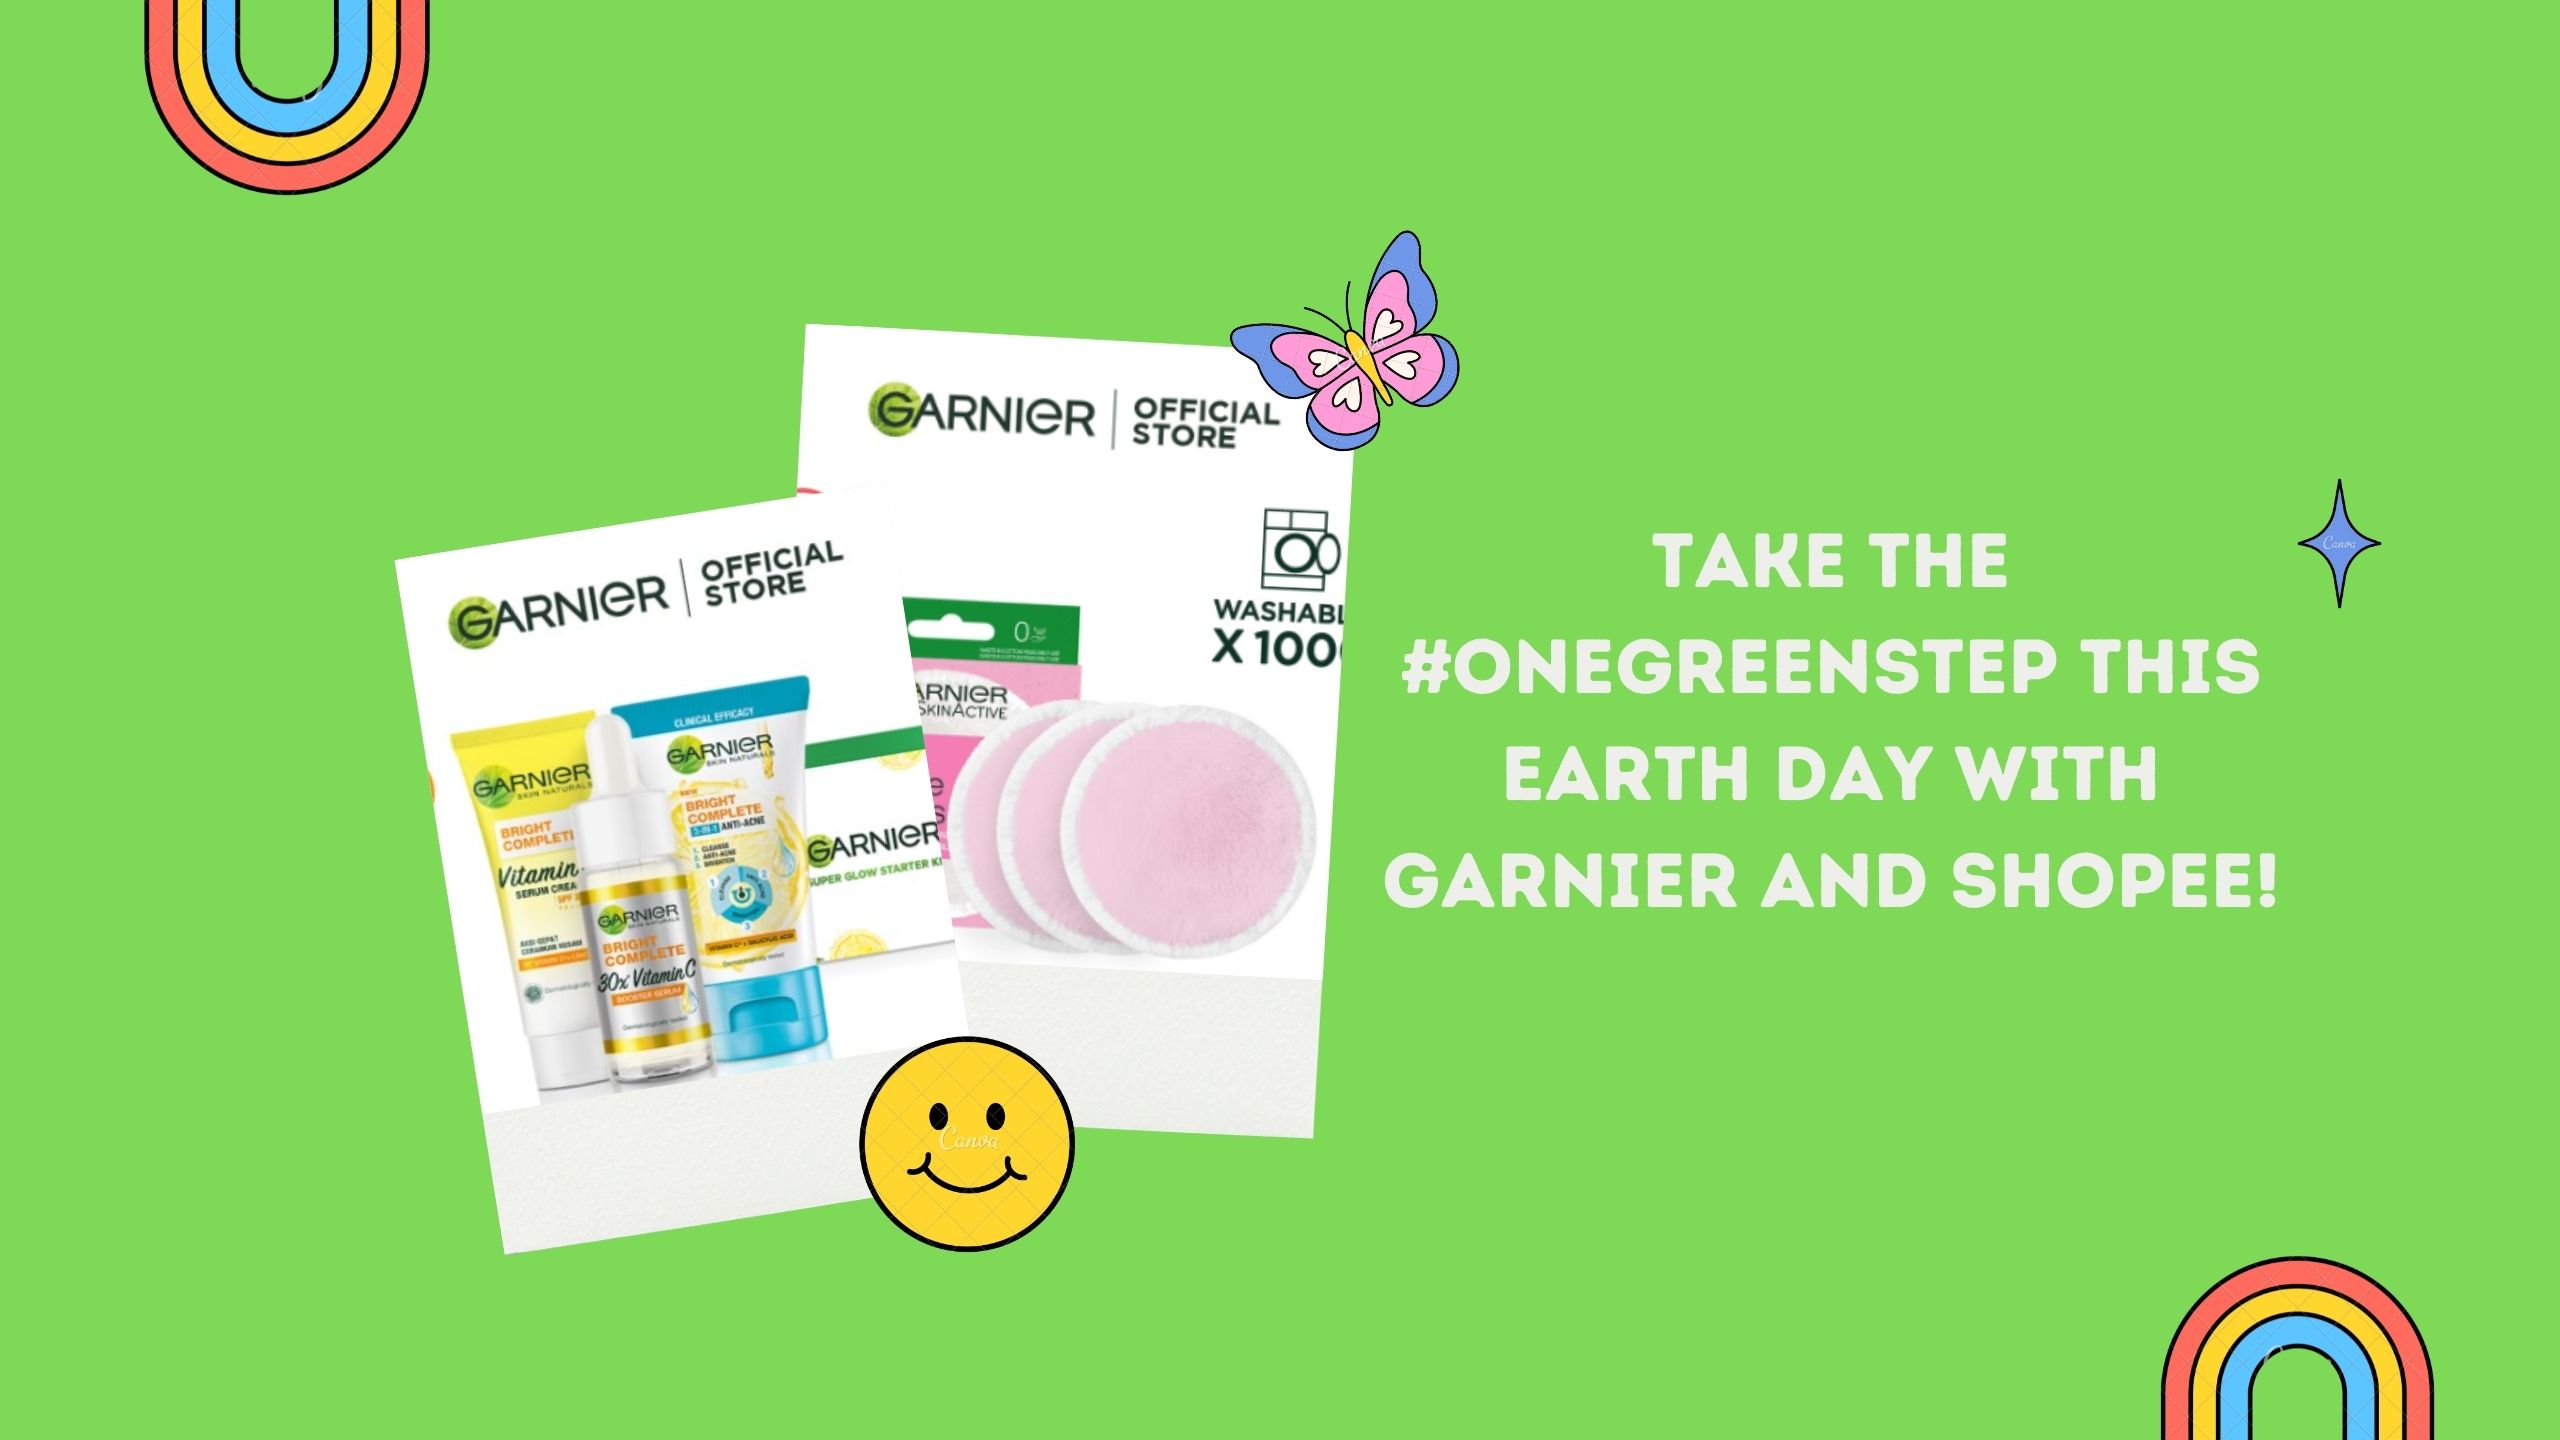 take-the-onegreenstep-this-earth-day-with-garnier-and-shopee